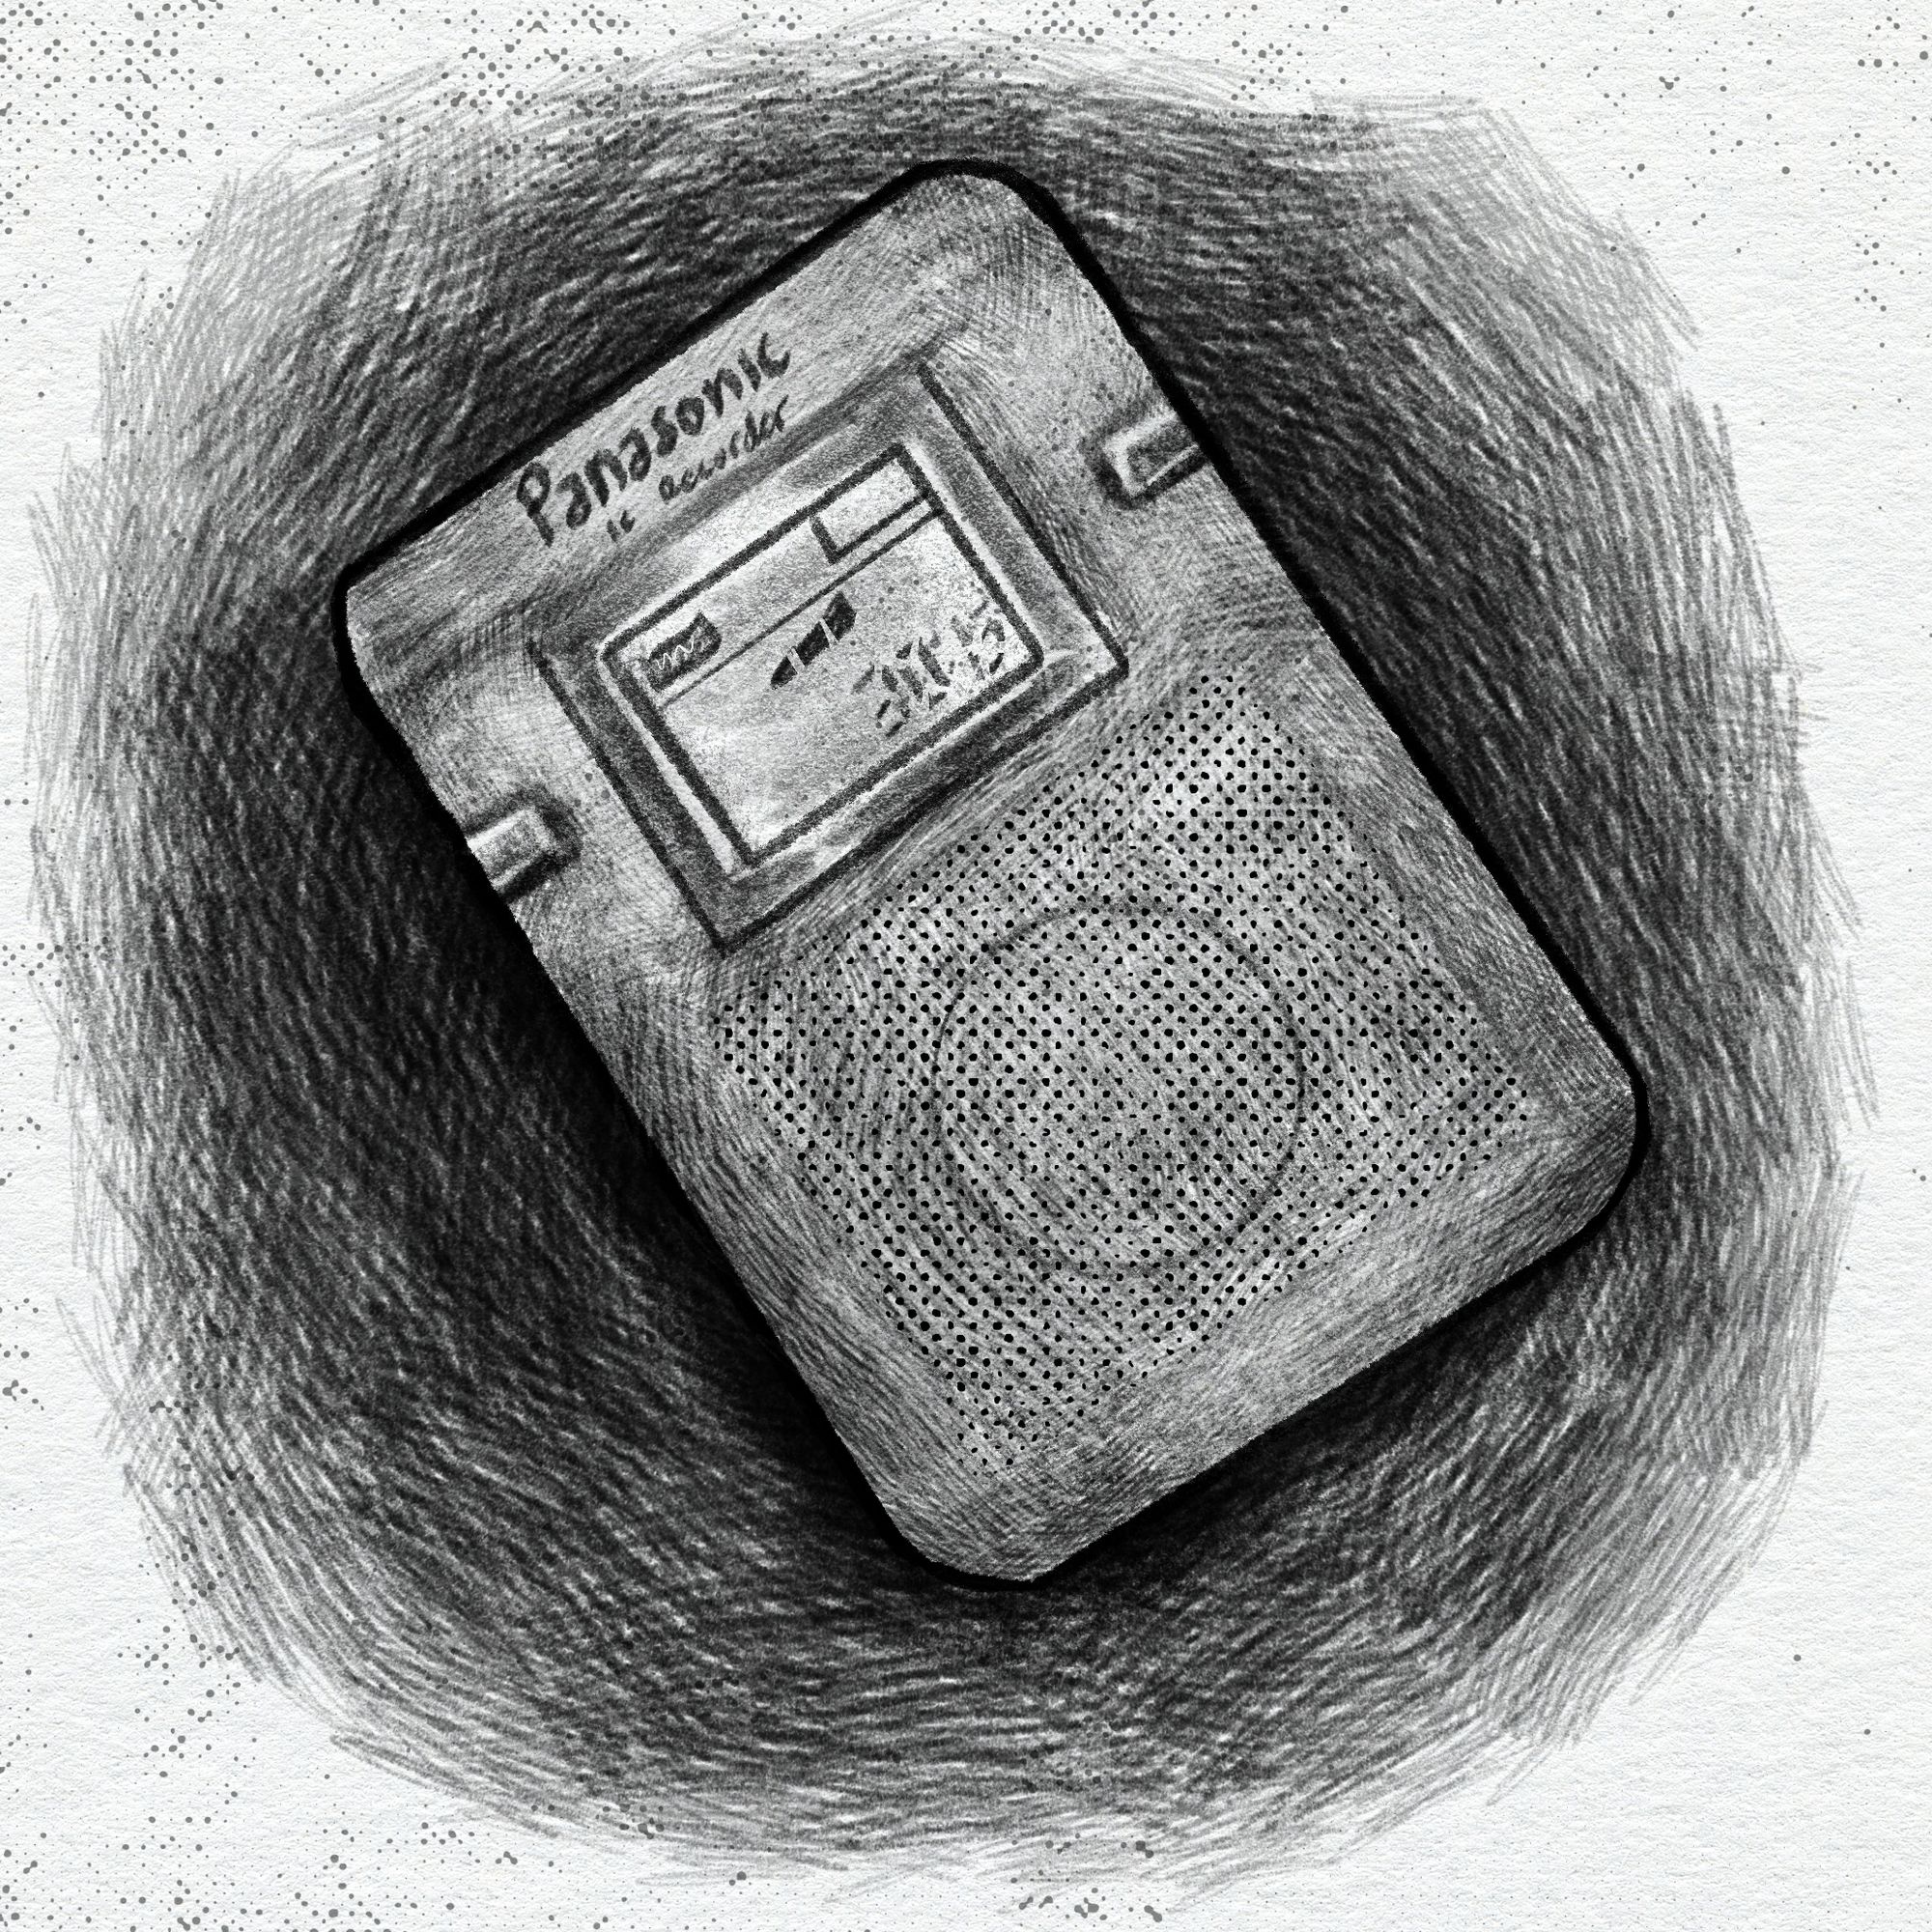 A graphite-style digital drawing of a Panasonic RR-DR60 recorder.